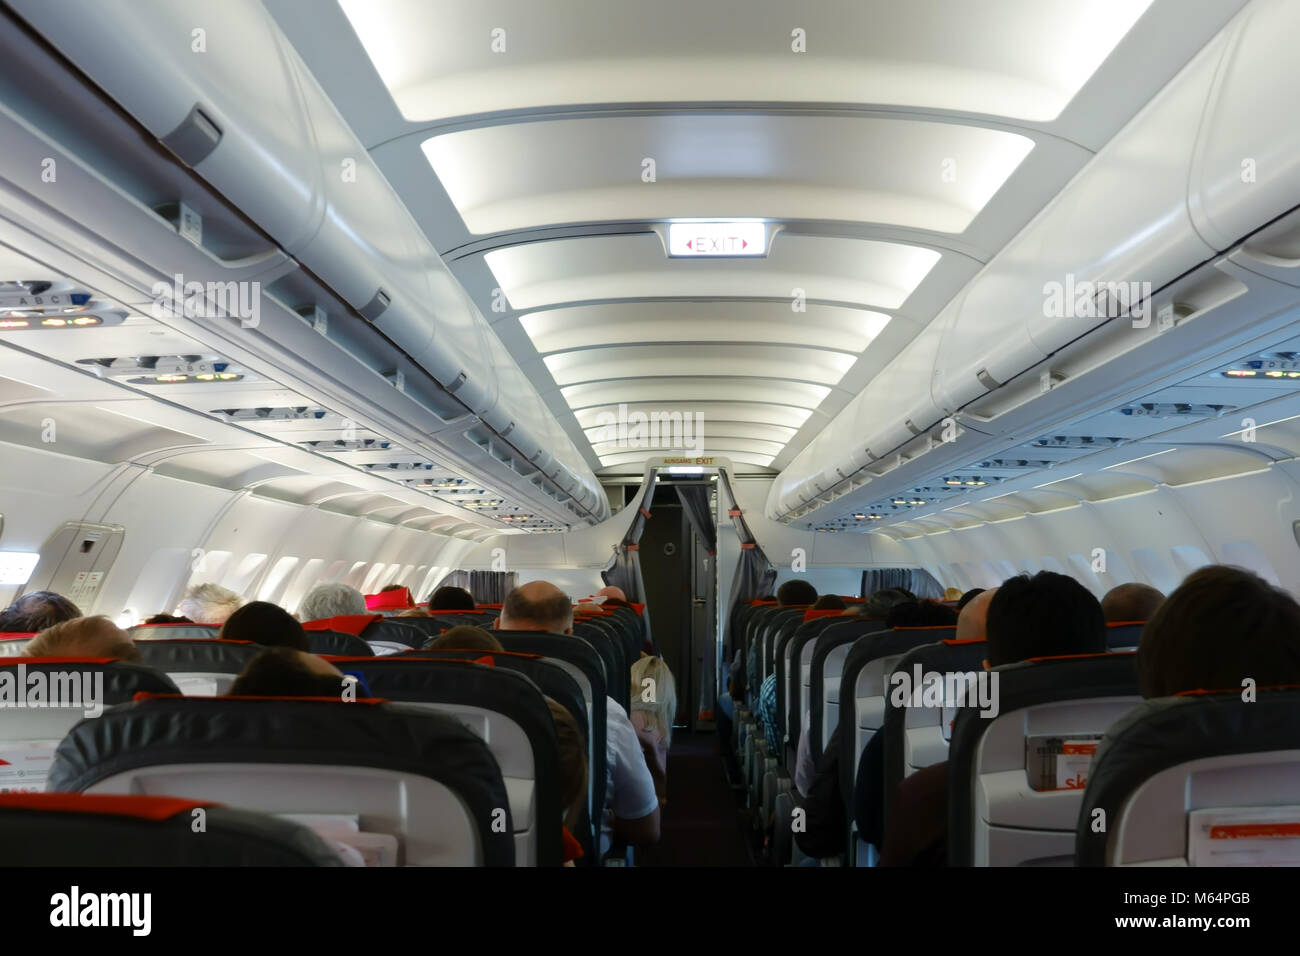 Passenger cabin in flight with people. Economy class. View from above. Stock Photo